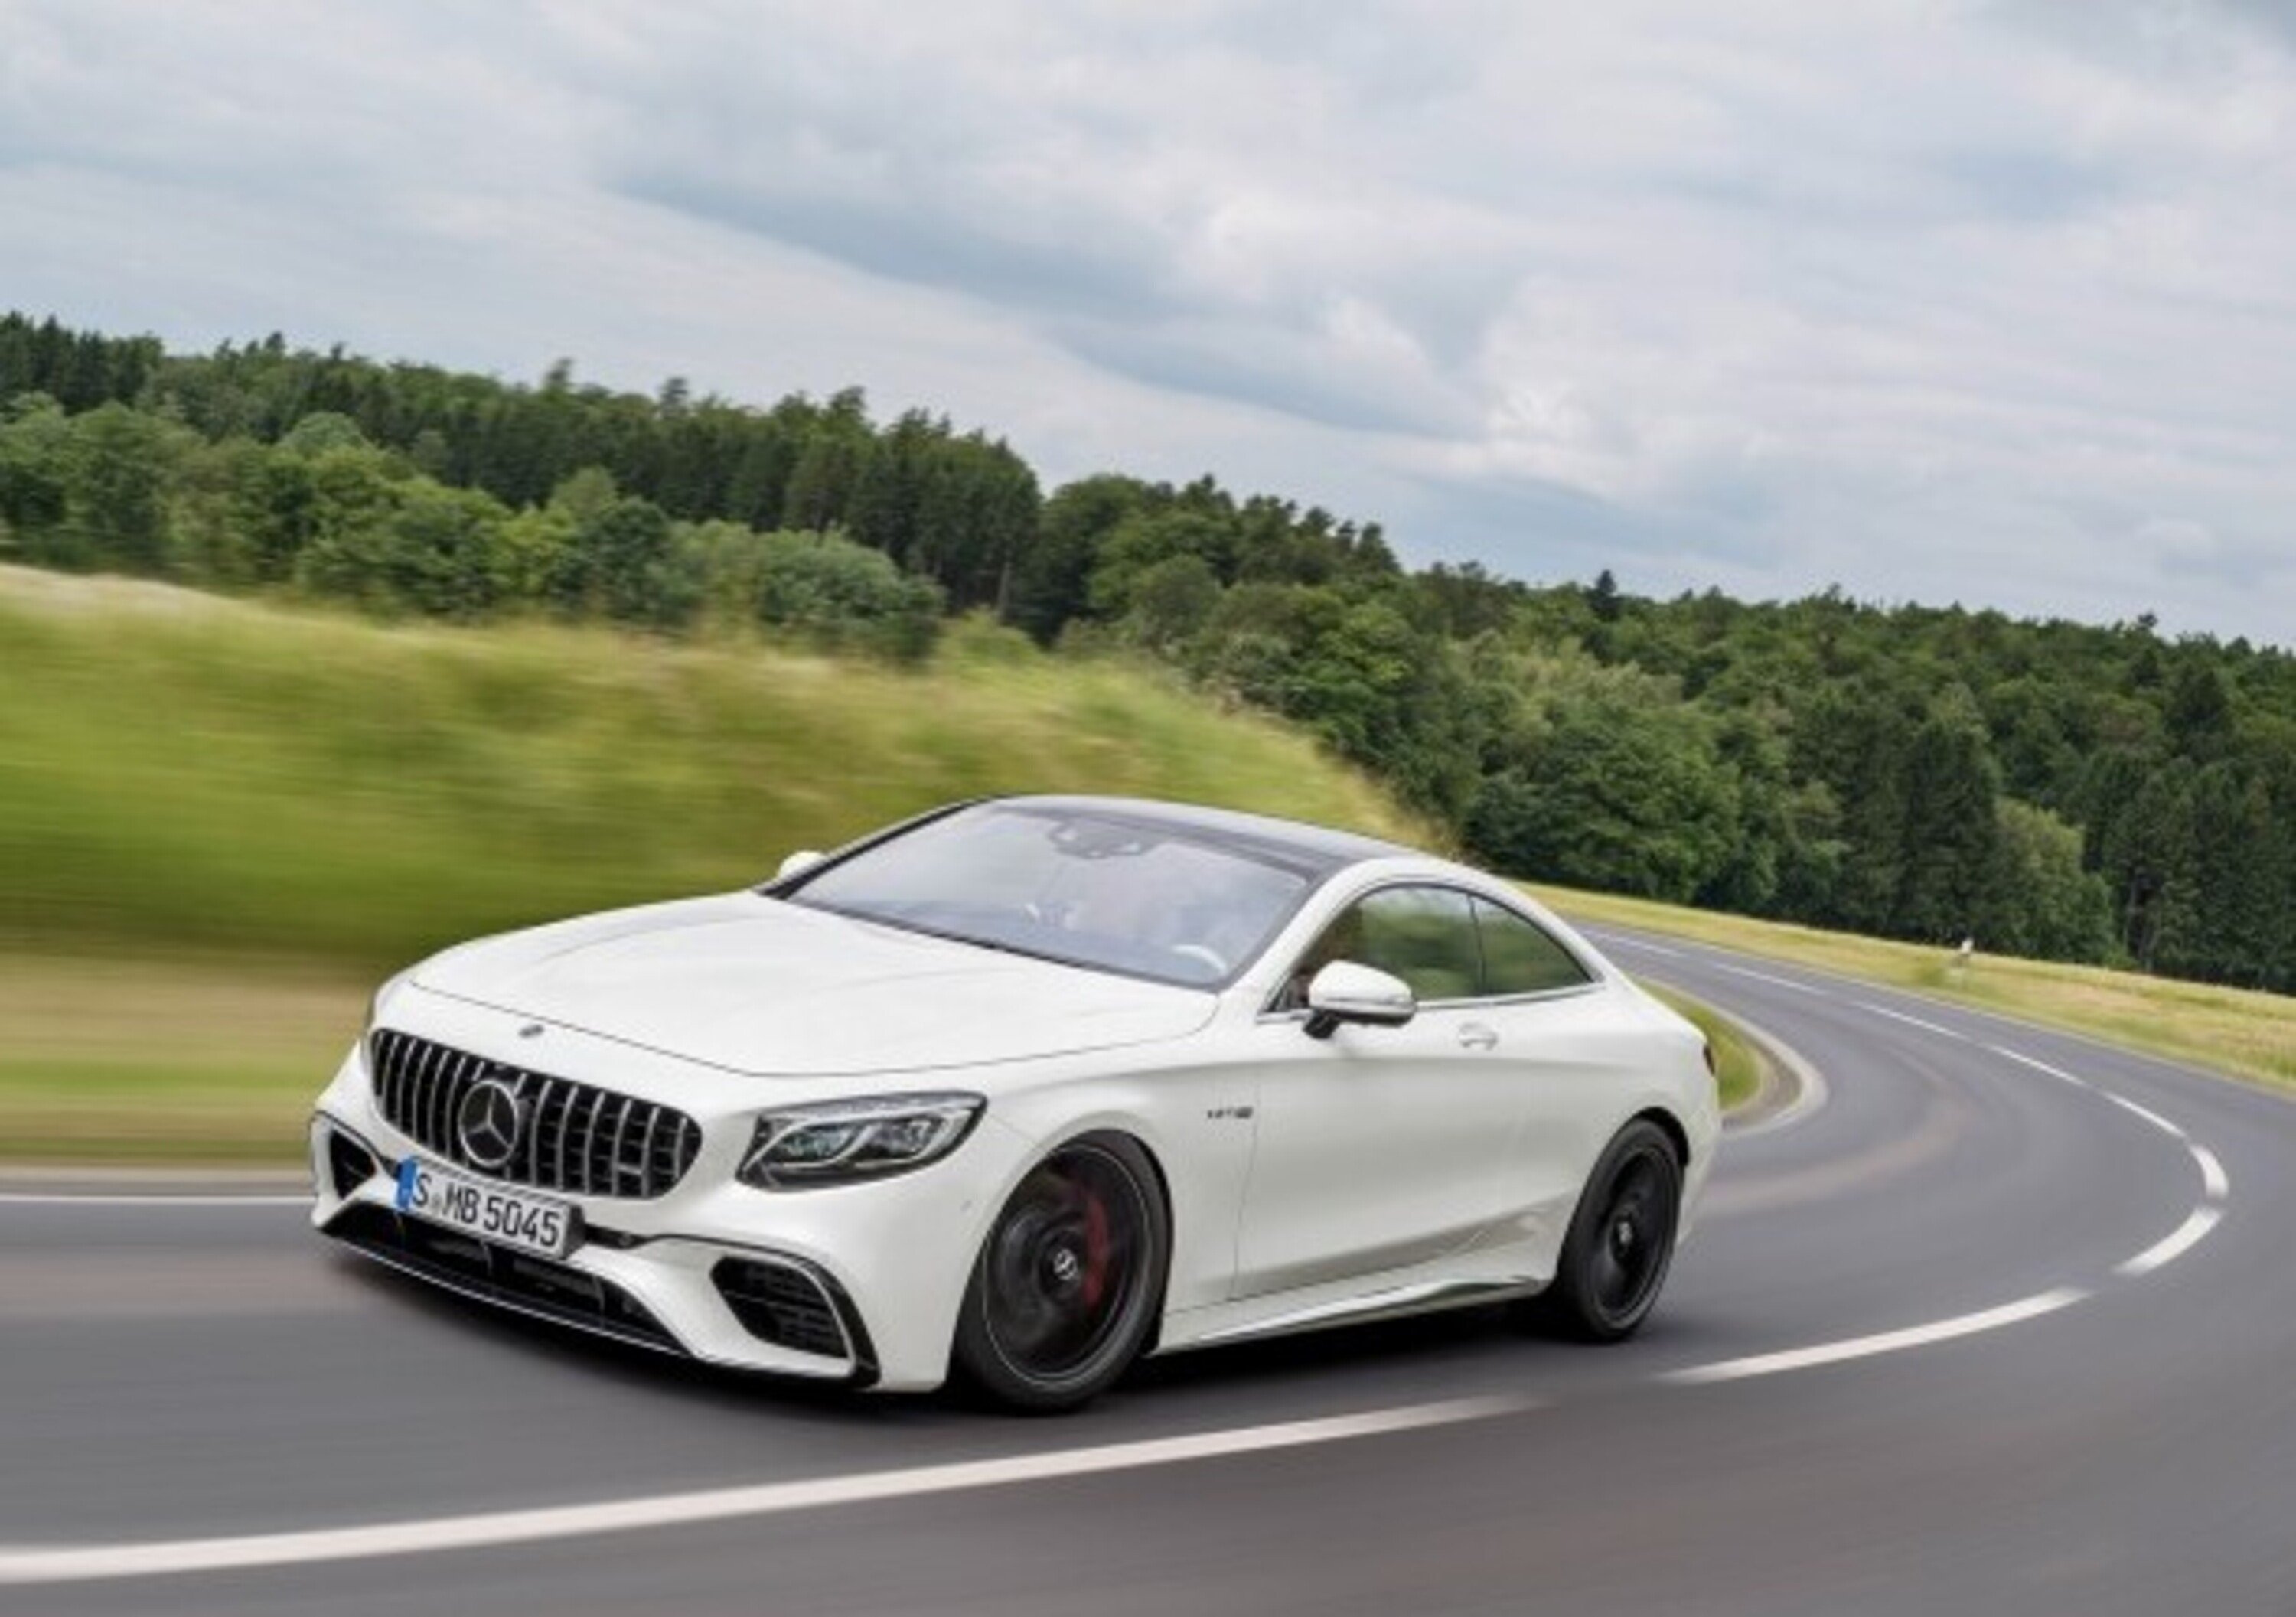 Mercedes Classe S Coup&eacute; restyling, debutto a Francoforte